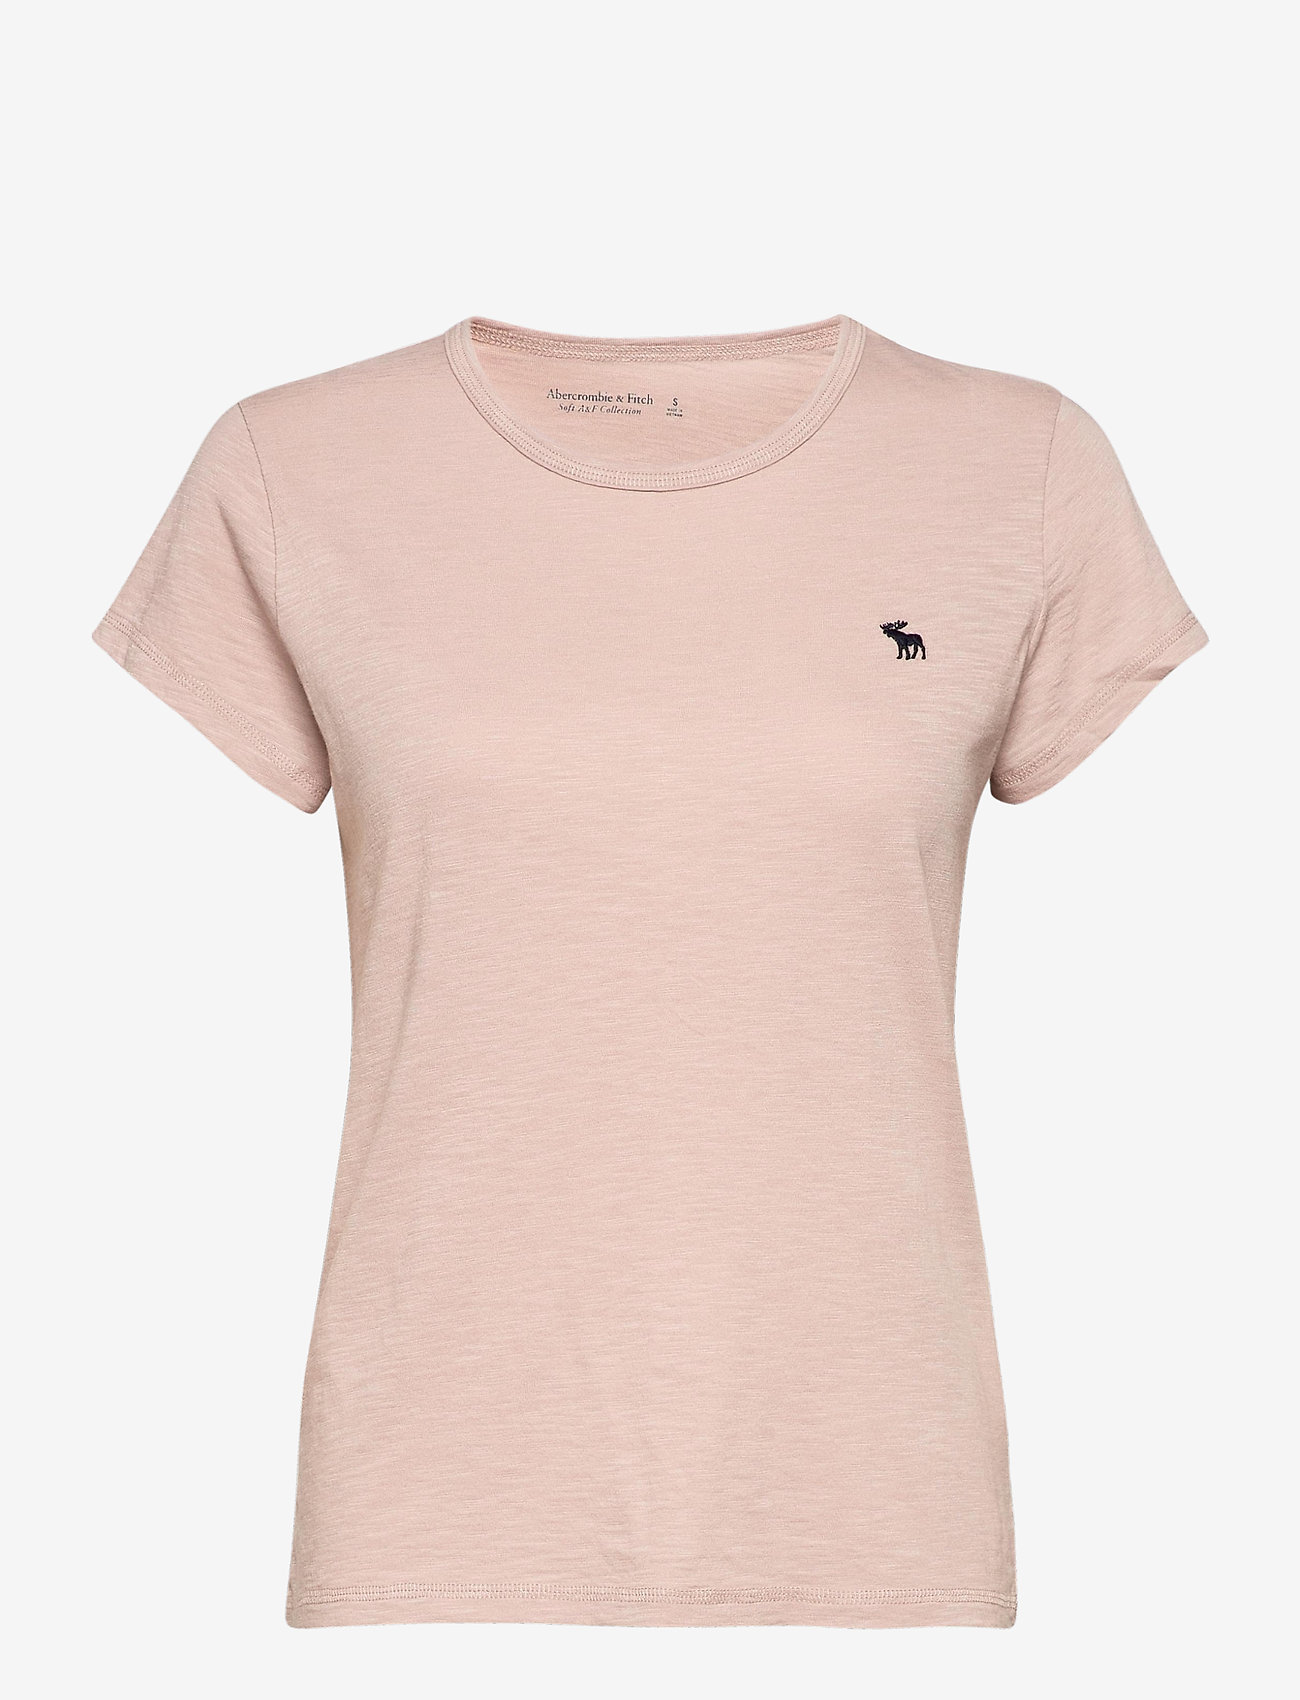 abercrombie and fitch womens t shirts